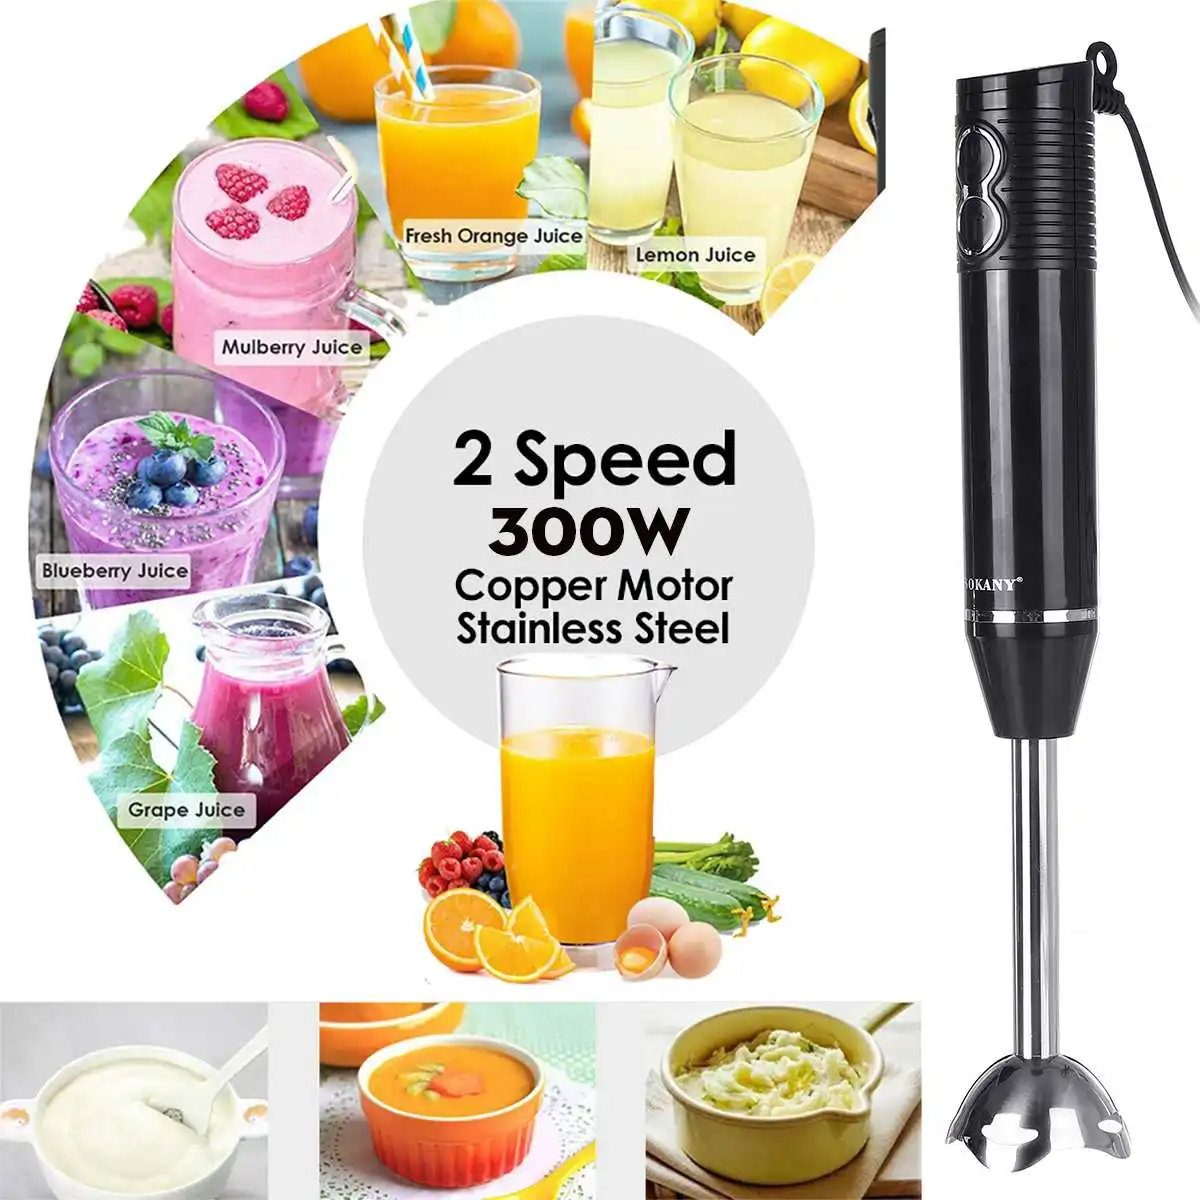 

3-in-1 Immersion Hand Stick Blender 300W 2 Speeds Electric Food Vegetable Grinder Hand-held Cooking Complementary Food Machine